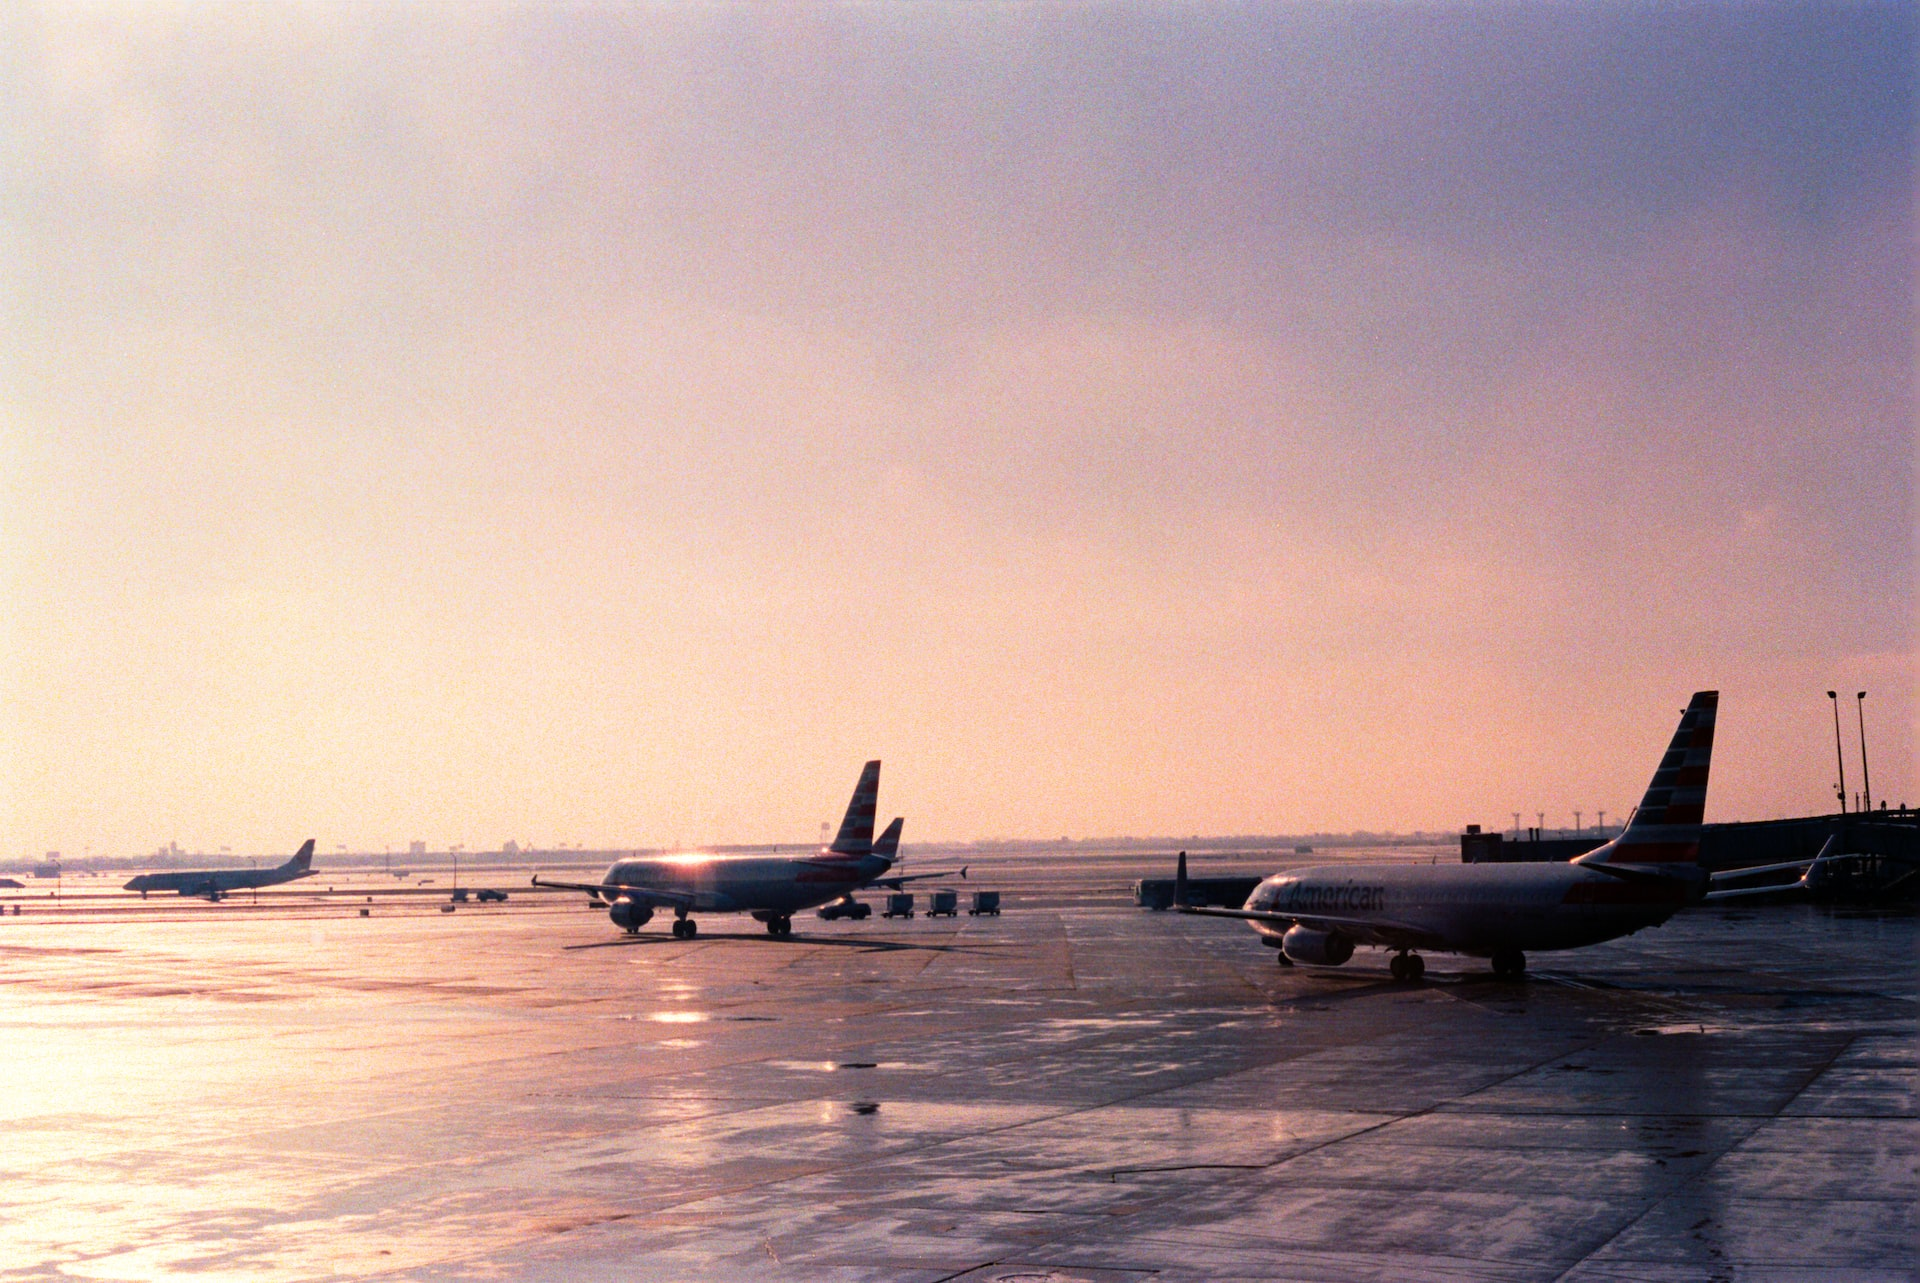 Airliners lining up for takeoff at an airport.